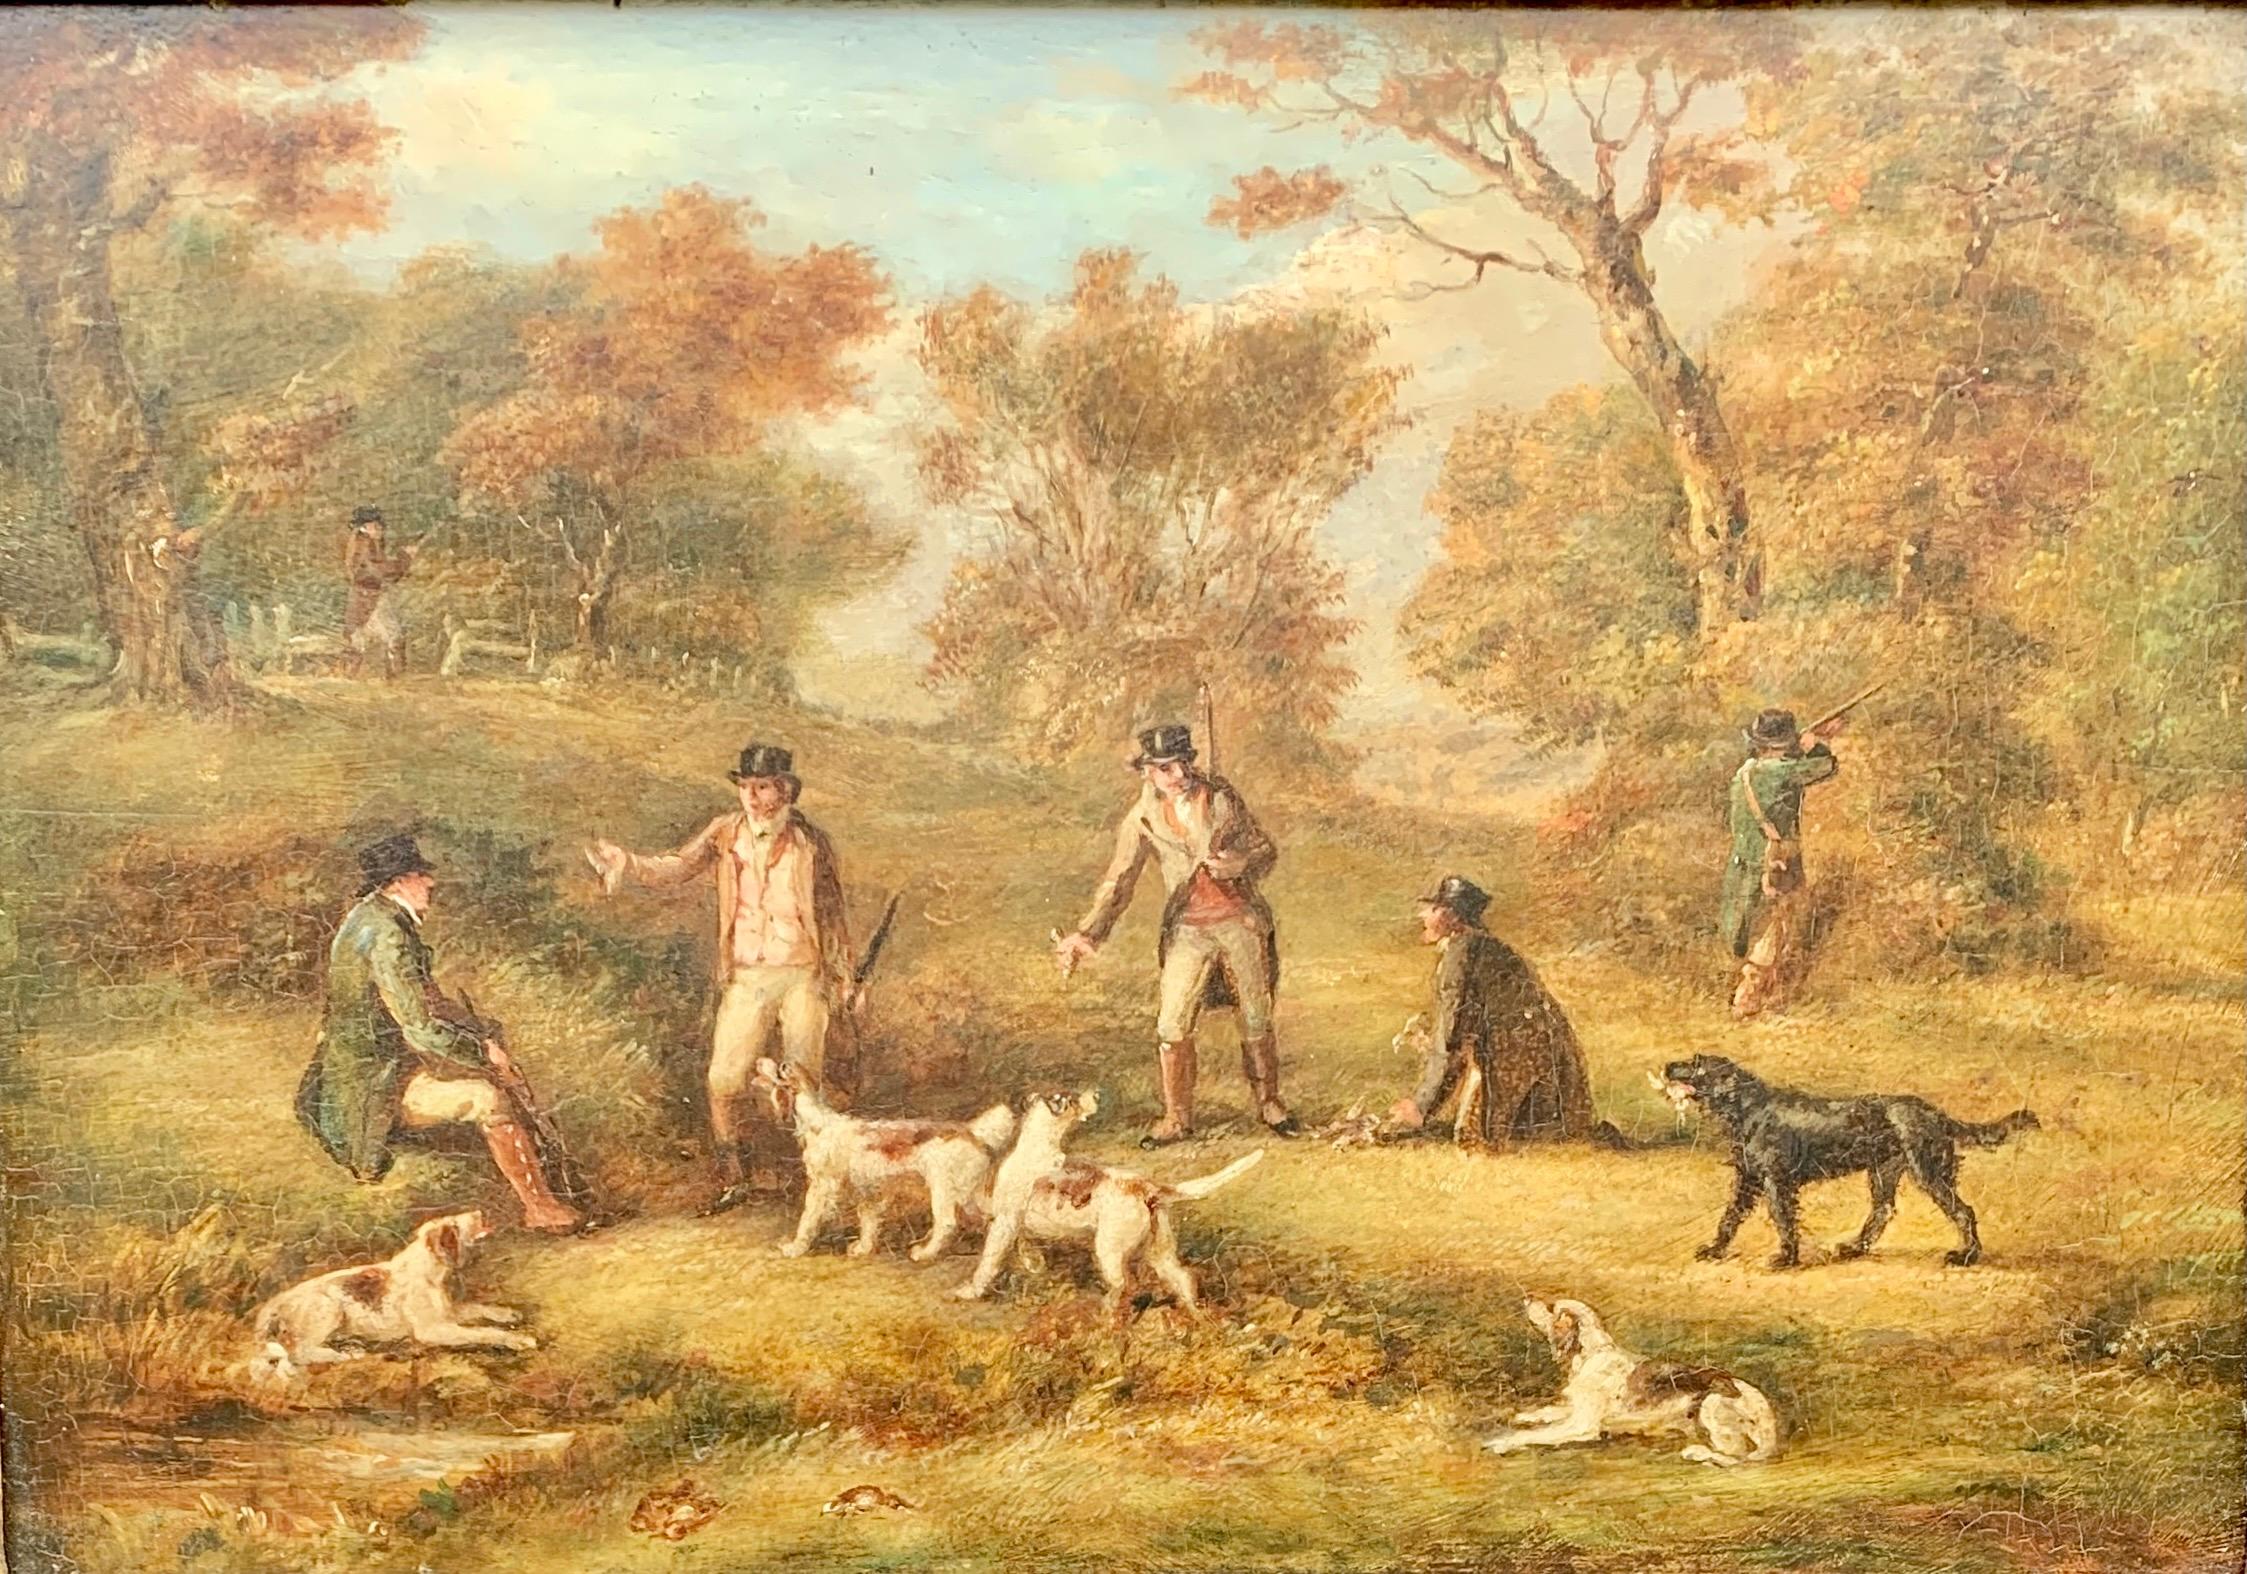 A set of English shooting paintings in extensive landscapes.  

All four are oils on wooden panels and show different bird hunting scenes, such as snipe, pheasant, and partridge hunting. 
